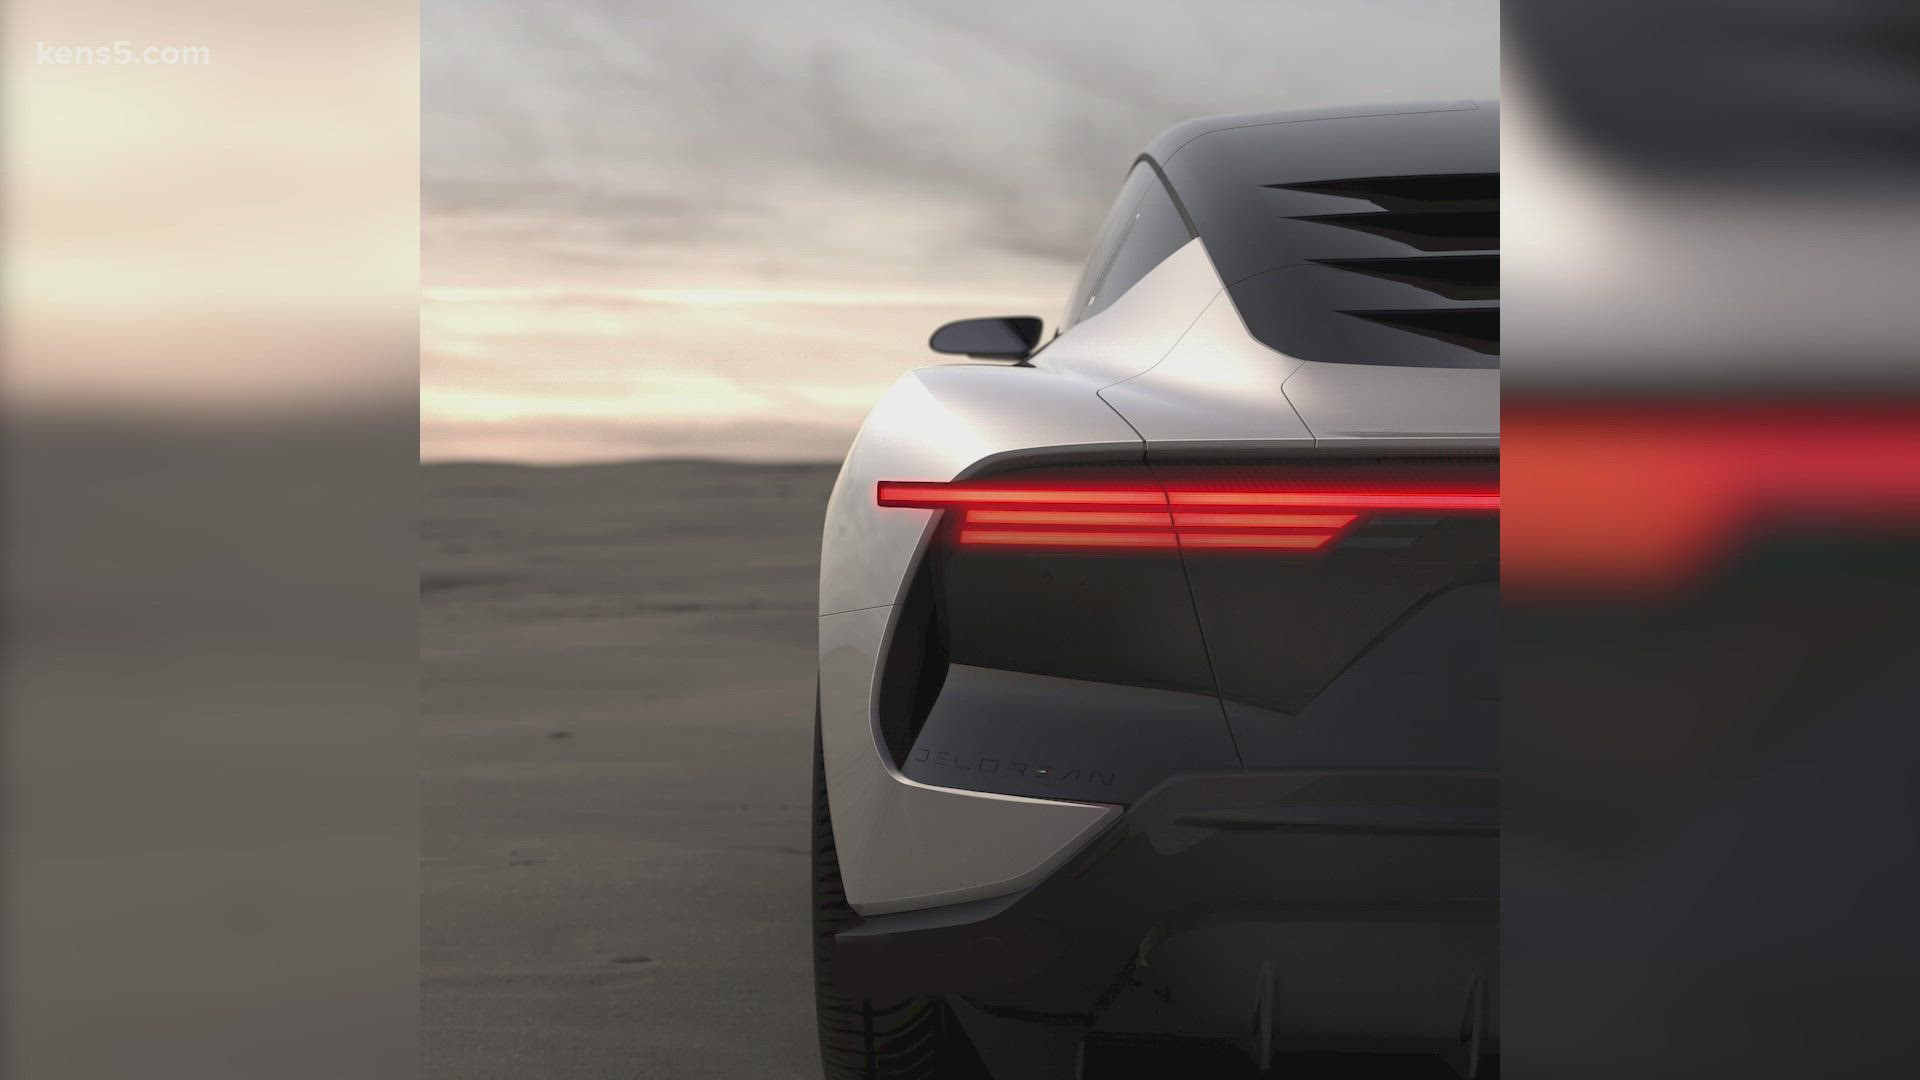 The concept car is expected to debut in August in Pebble Beach.